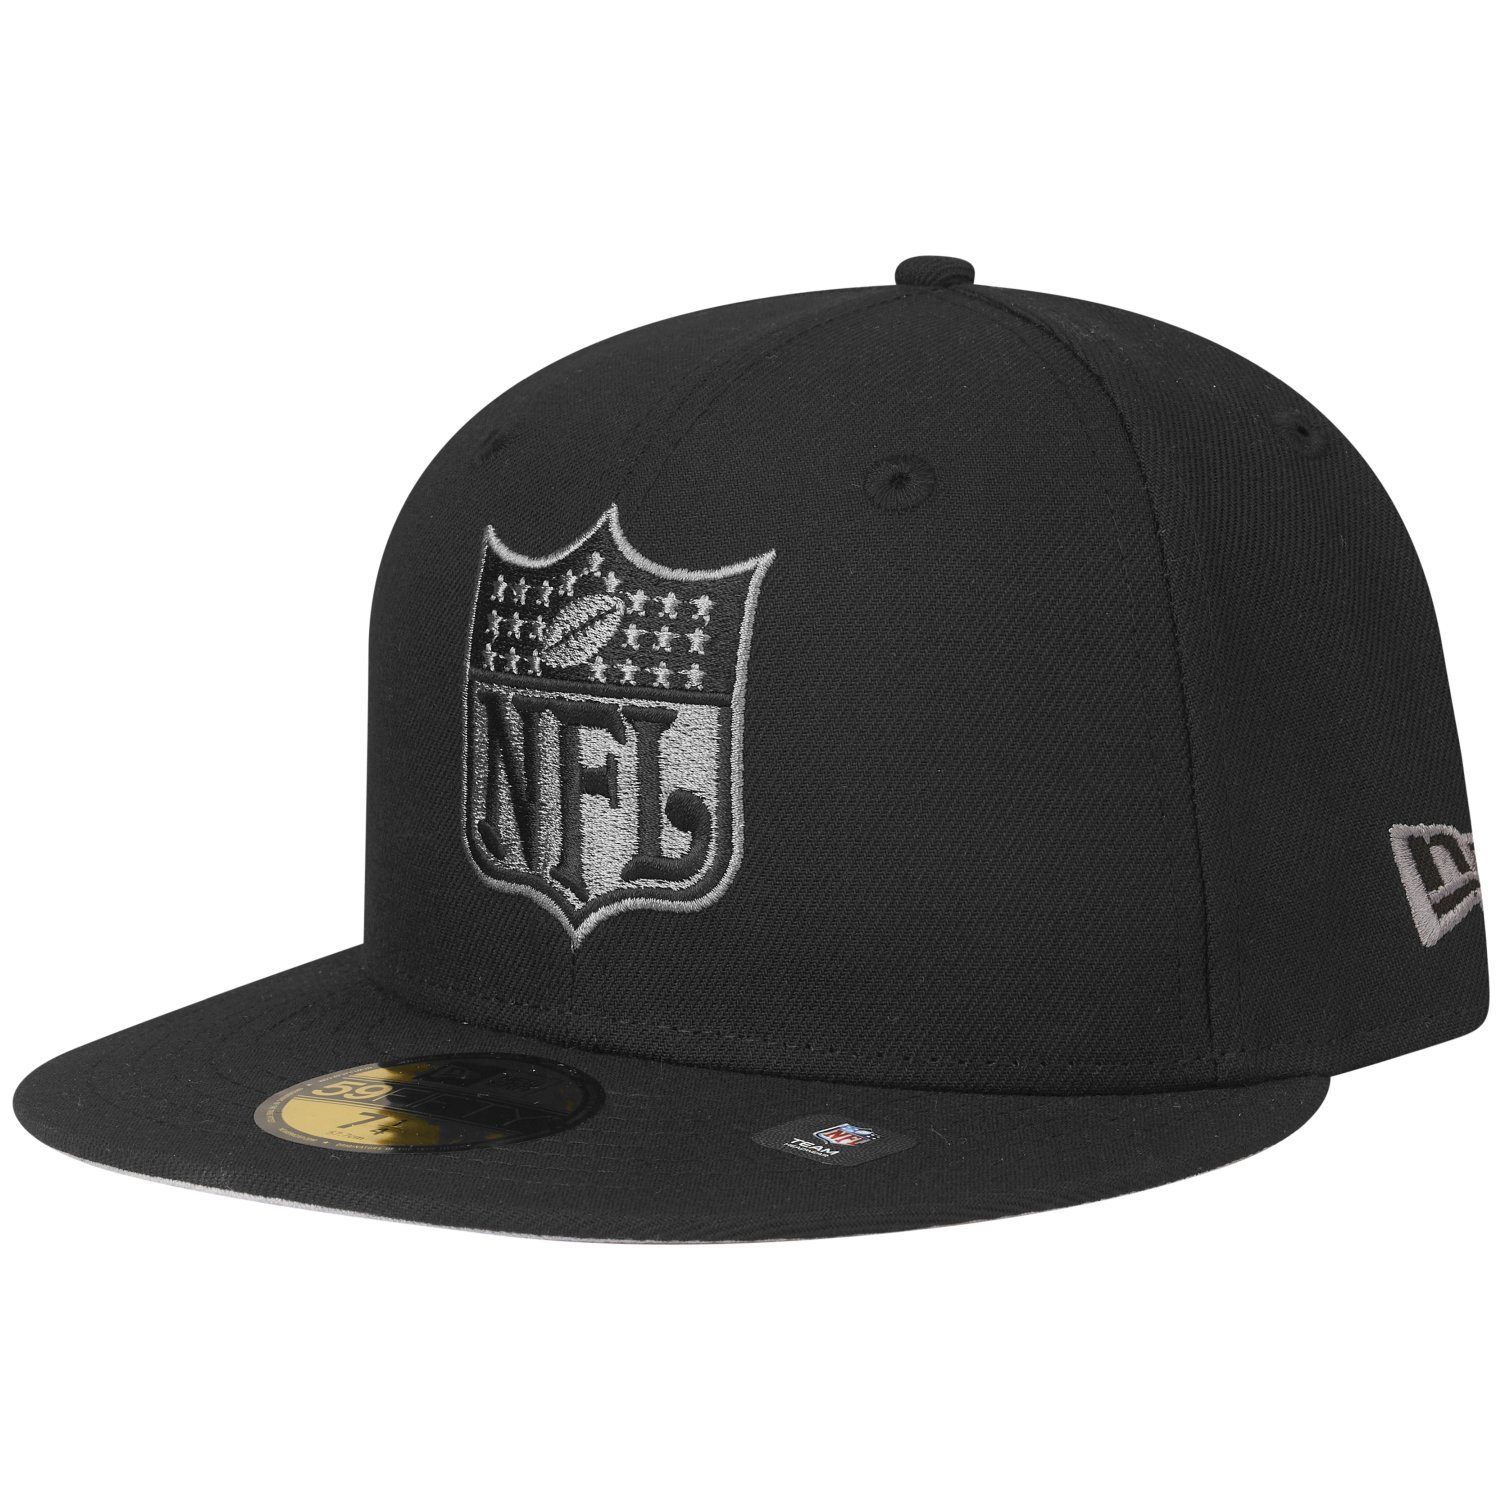 New Era Fitted Cap 59Fifty NFL TEAMS NFL SHIELD | Fitted Caps